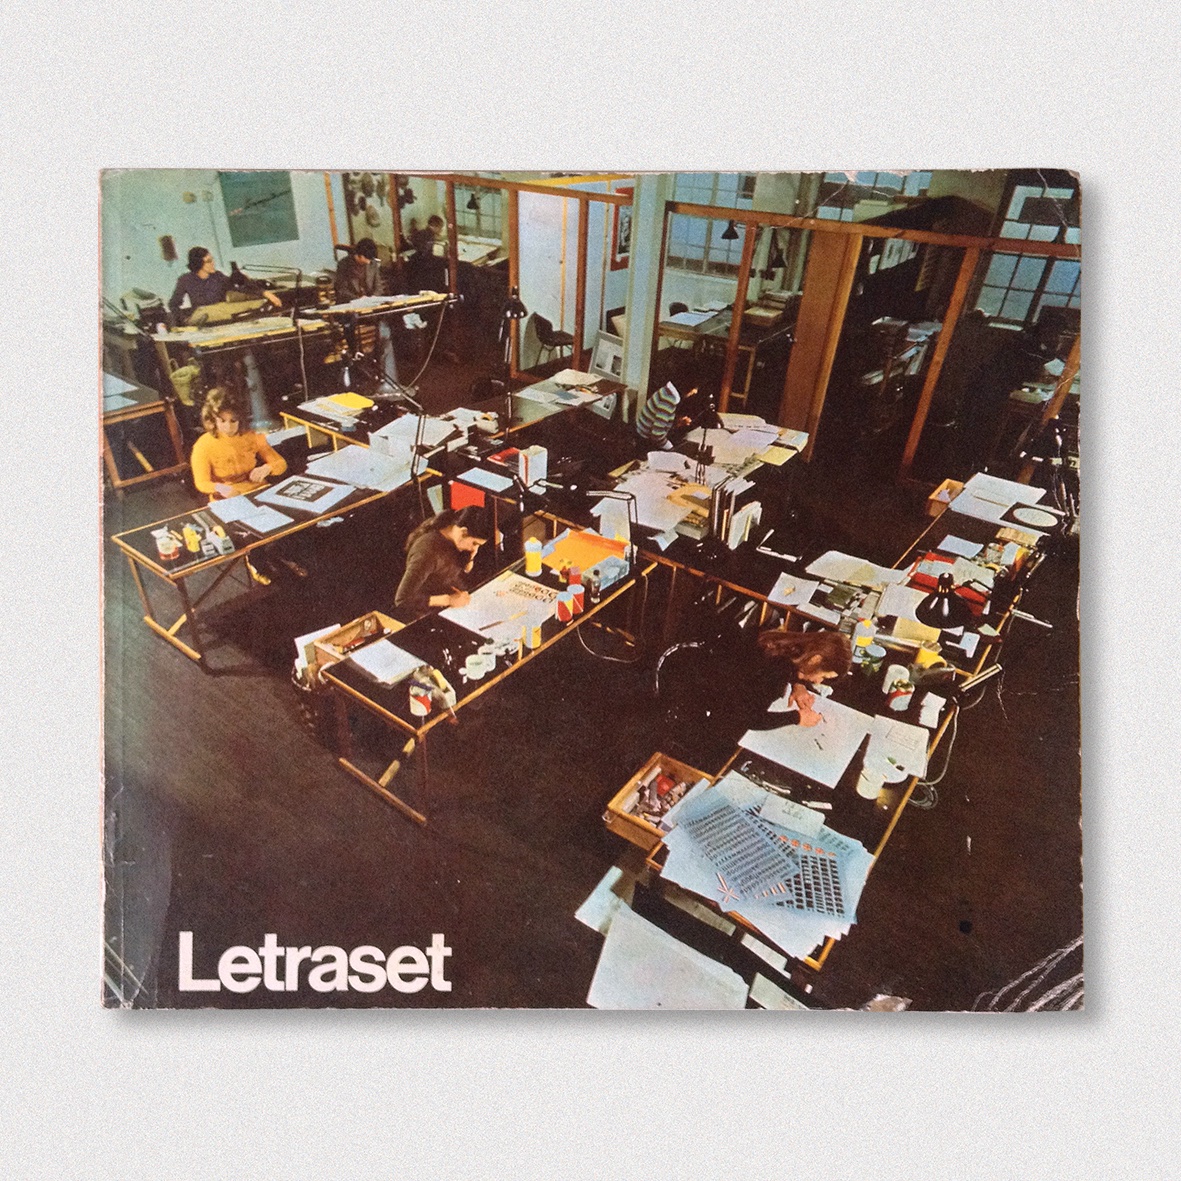 Just taken delivery of this beauty - #Letraset catalogue from the #1970s showing the #studio of #CrosbyFletcherForbes on the cover. #theocrosby #alanfletcher #colinforbes @pentagram #london #drytransfer #lettering #typography #graphicdesign